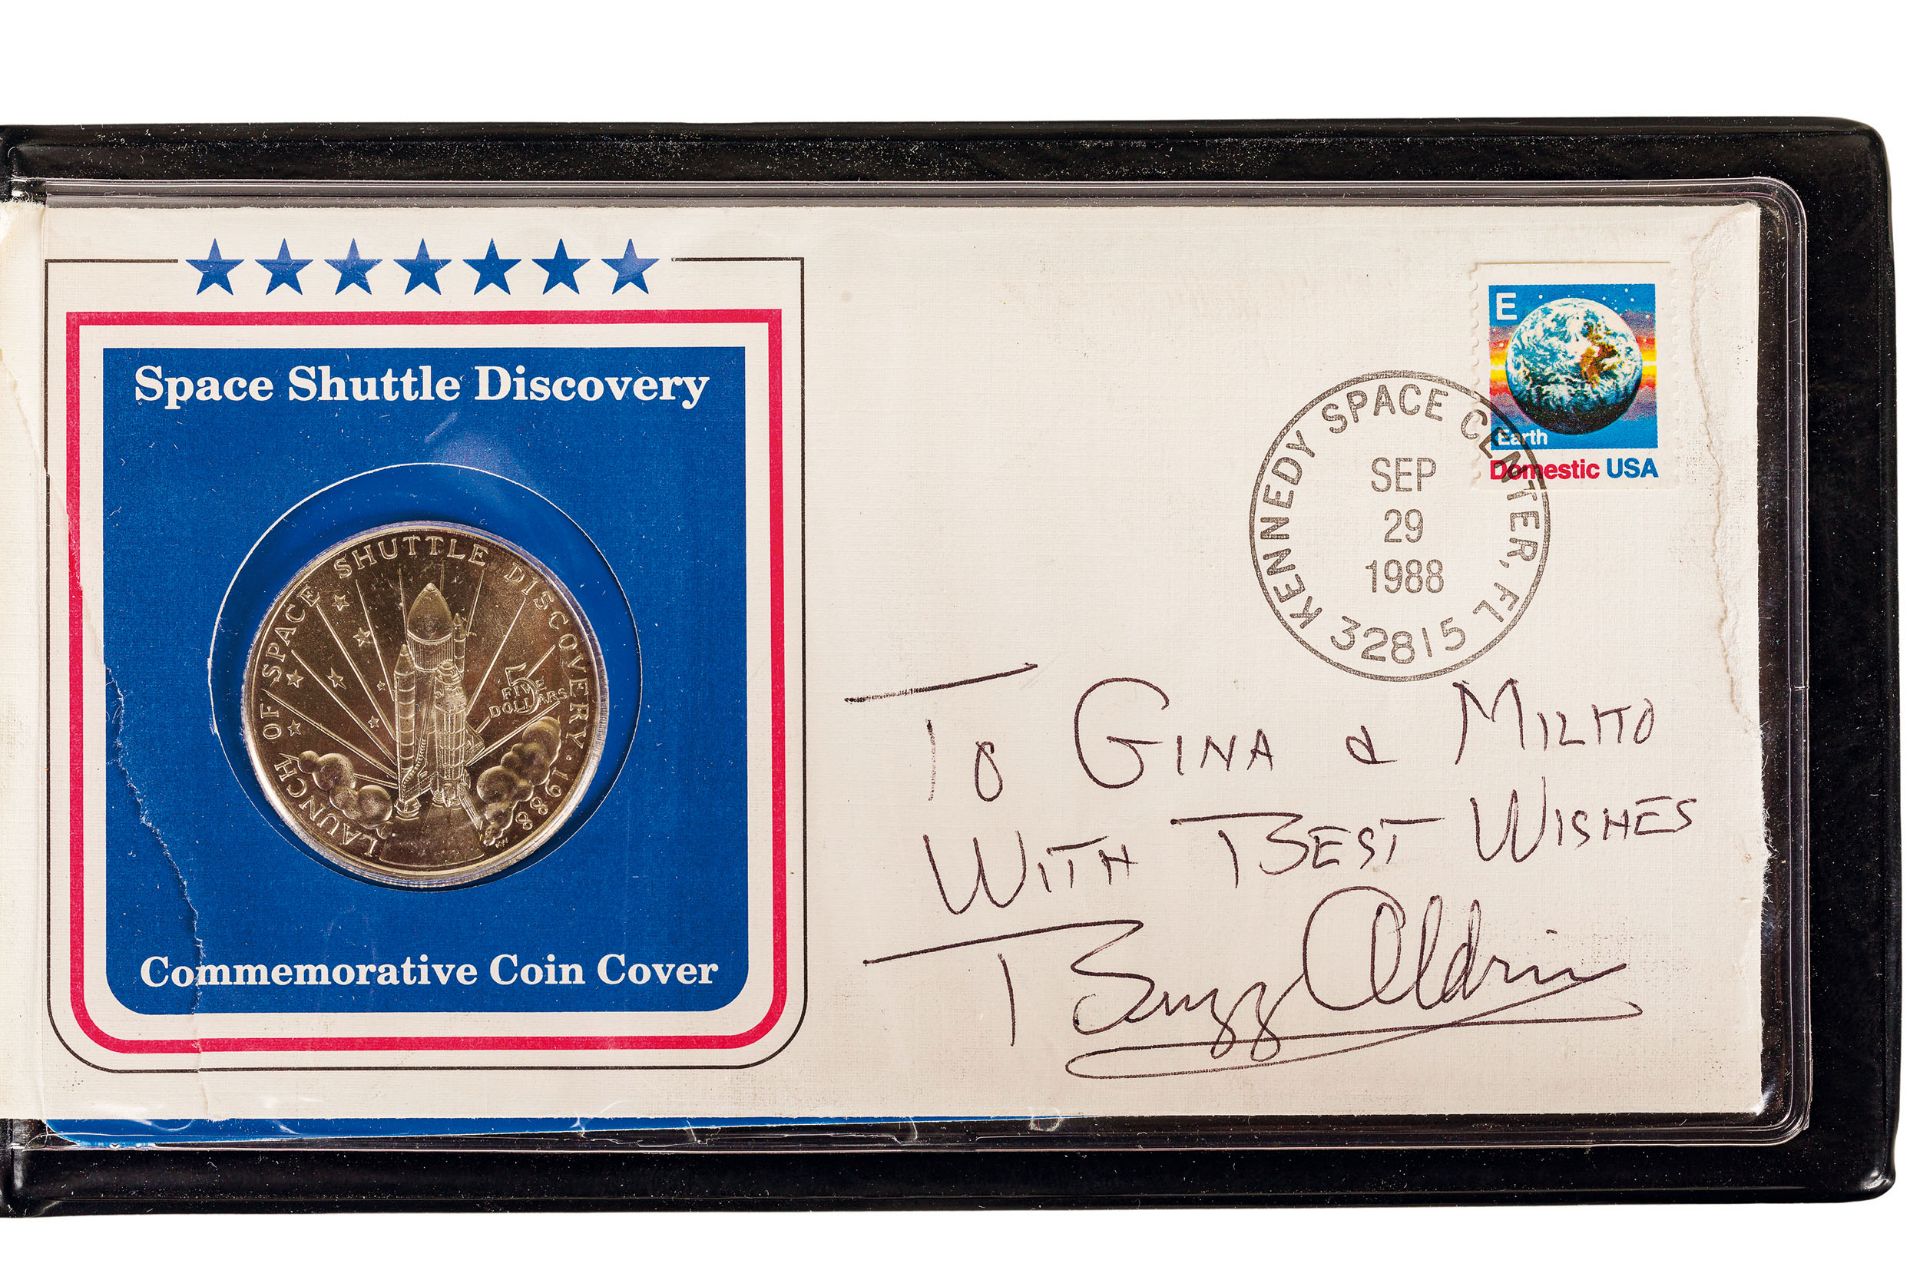 SPACE SHUTTLE DISCOVERY COMMEMORATIVE COIN COVER, KENNEDY SPACE CENTER, 1988 - Image 3 of 5